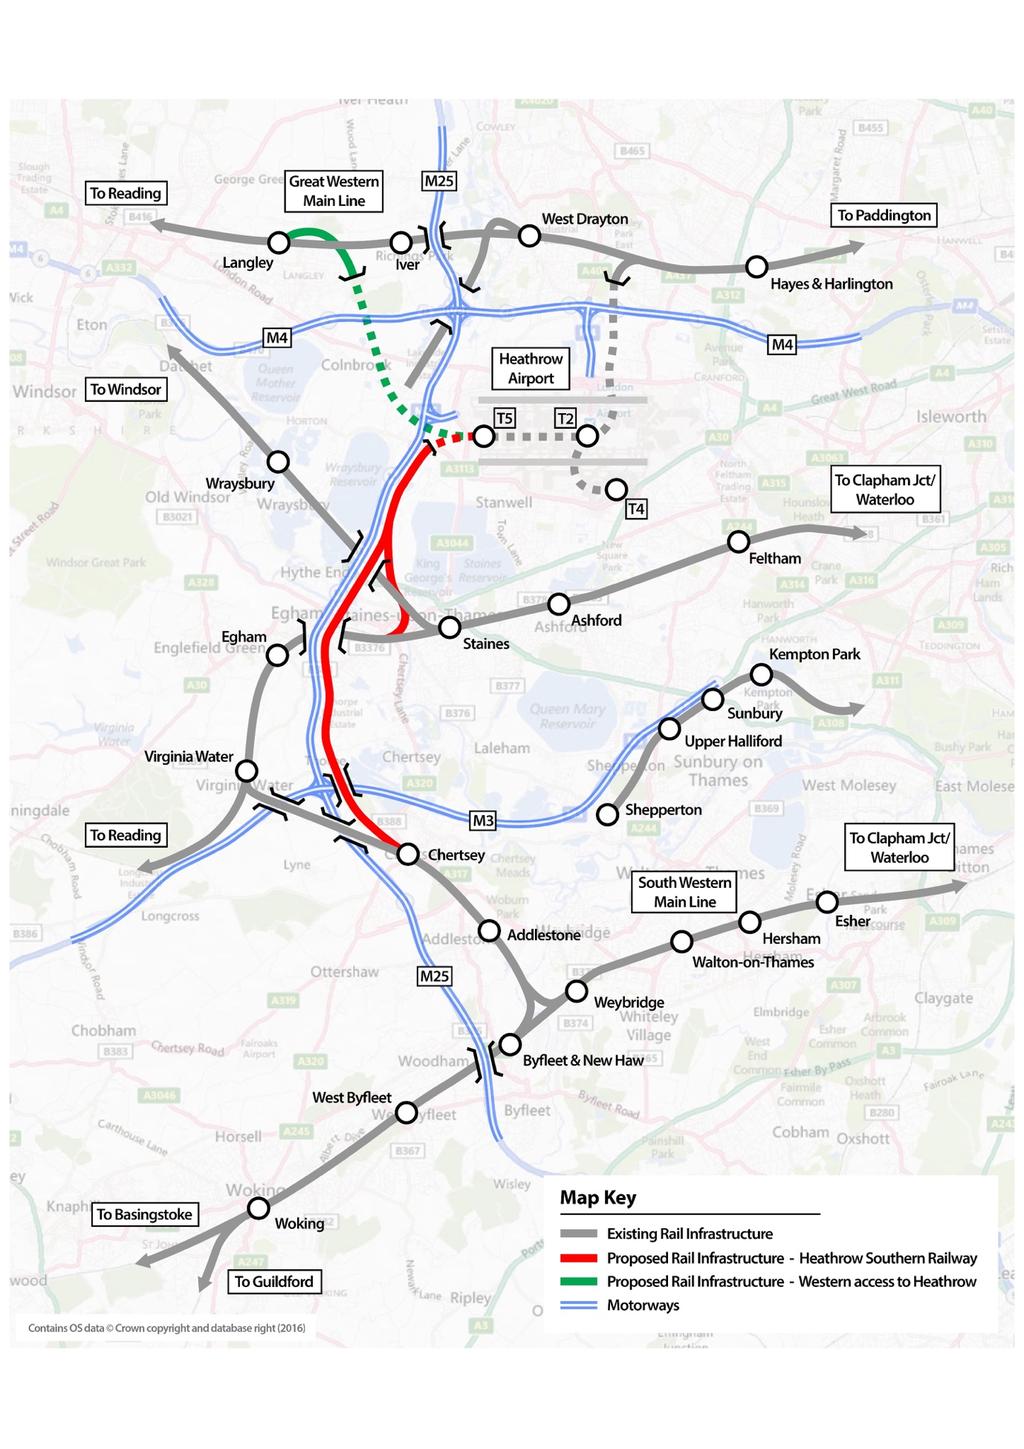 Appendix A Heathrow Southern Railway Ltd (HSRL) is the company promoting a privately financed scheme to provide new rail access to Heathrow from the south, providing significant benefits to both